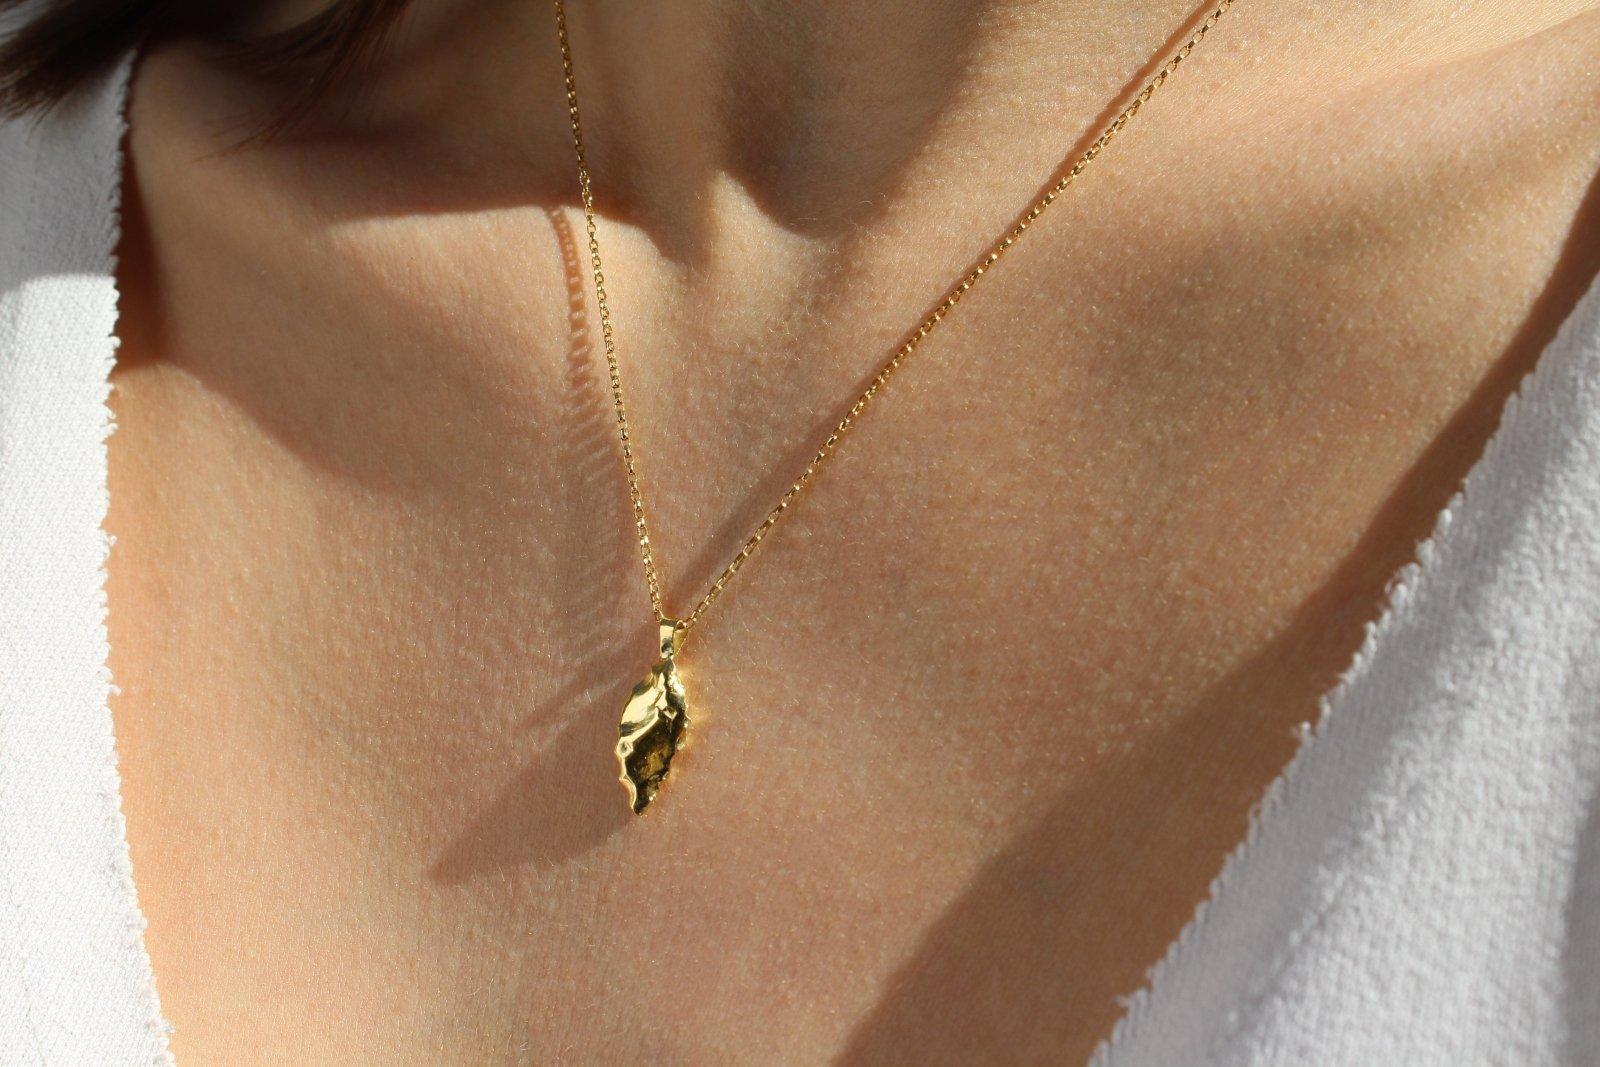 Neolithic Arrowhead Necklace - 9ct Gold - Brotheridge